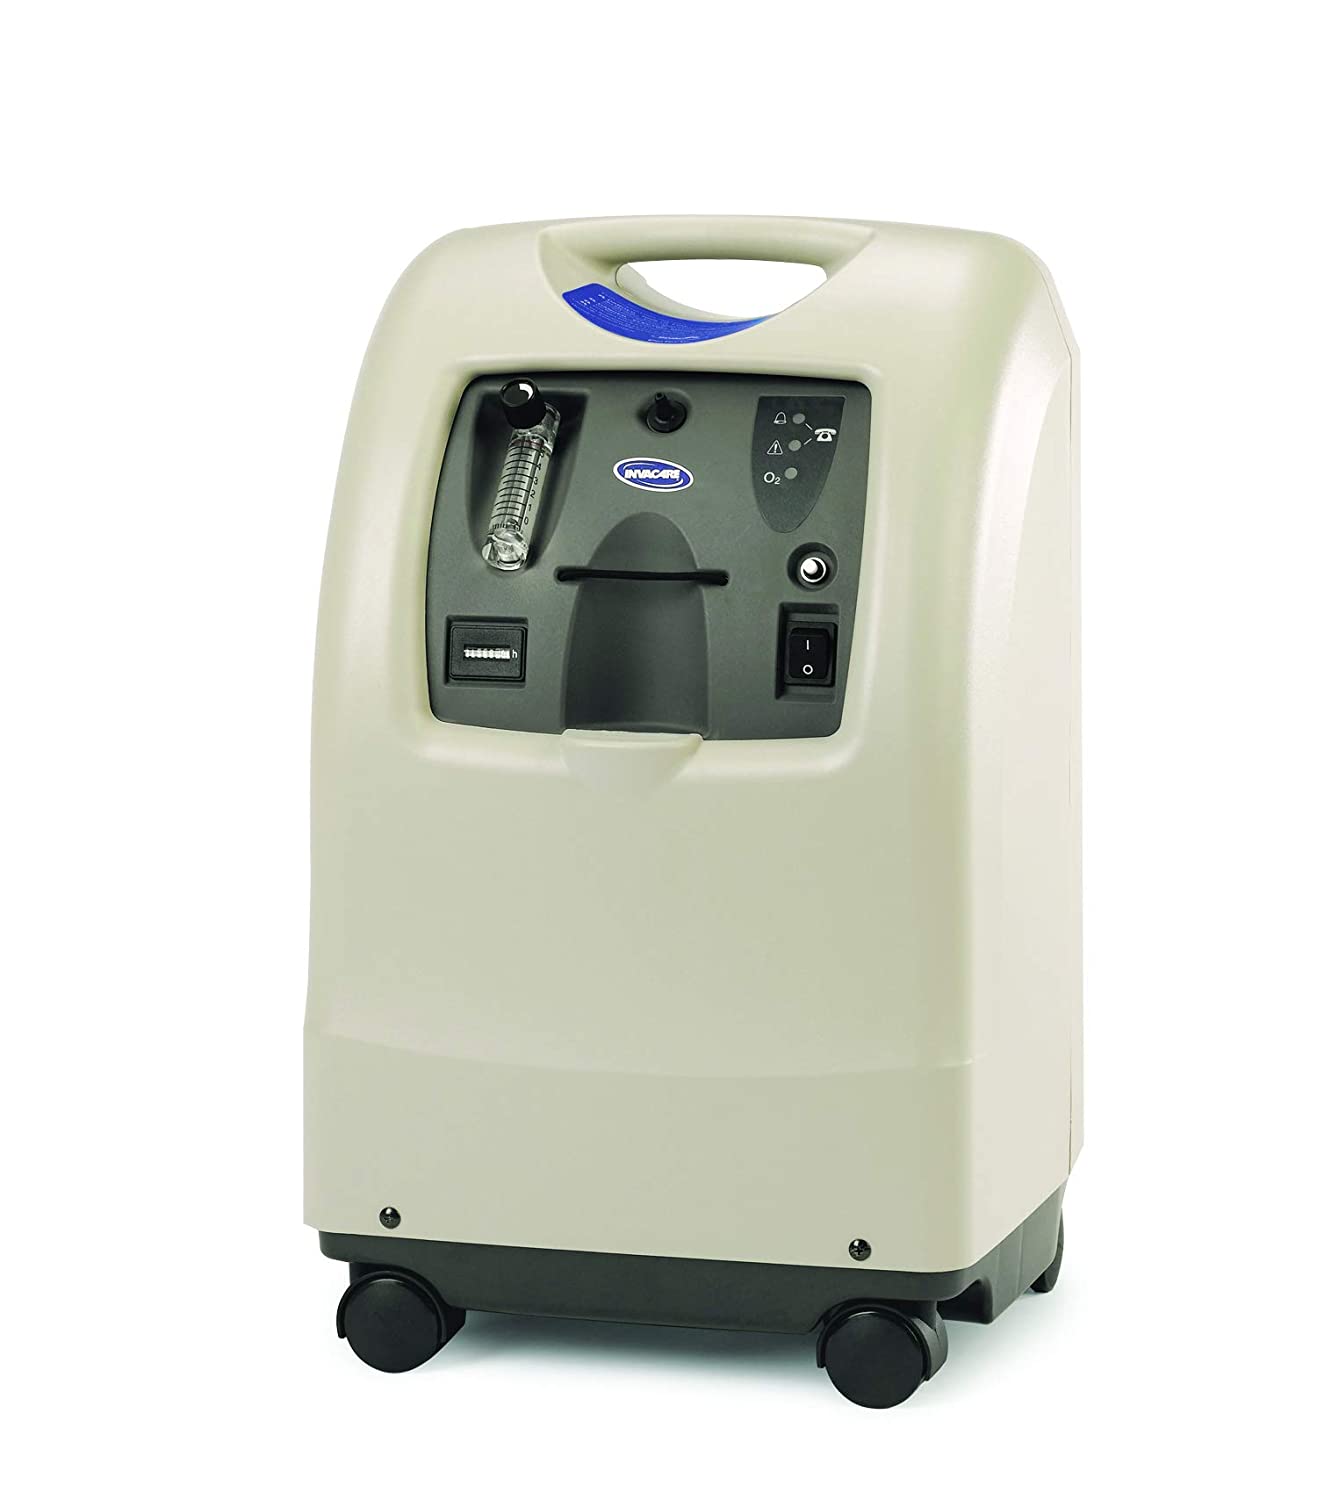 Oxygen Concentrator ($179.00 Weekly Price)